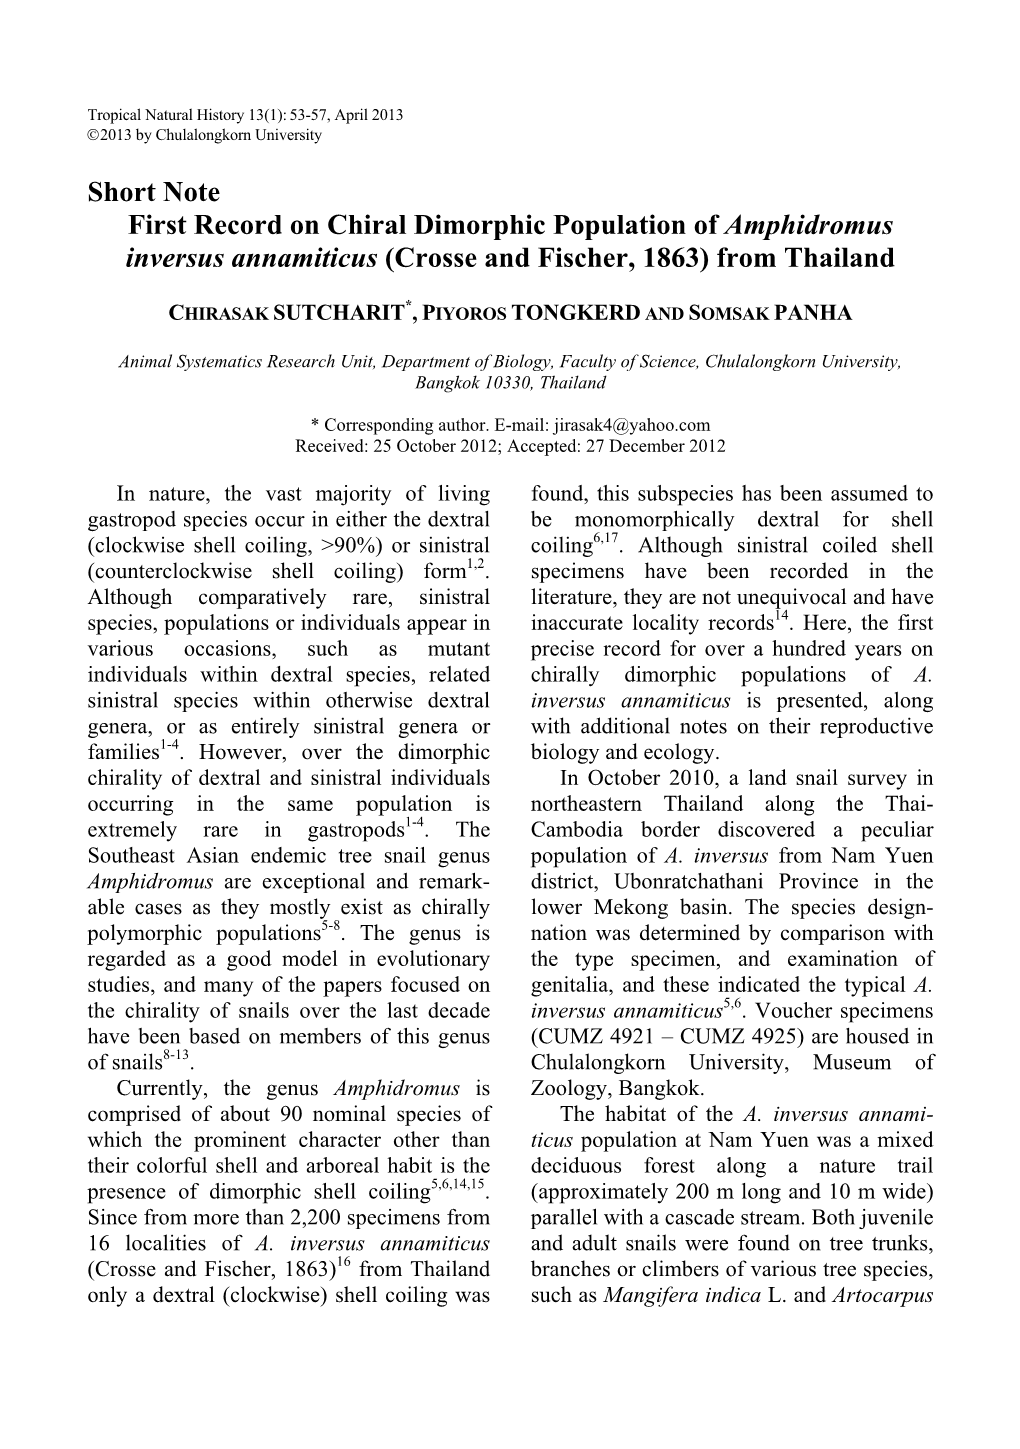 Short Note First Record on Chiral Dimorphic Population of Amphidromus Inversus Annamiticus (Crosse and Fischer, 1863) from Thailand